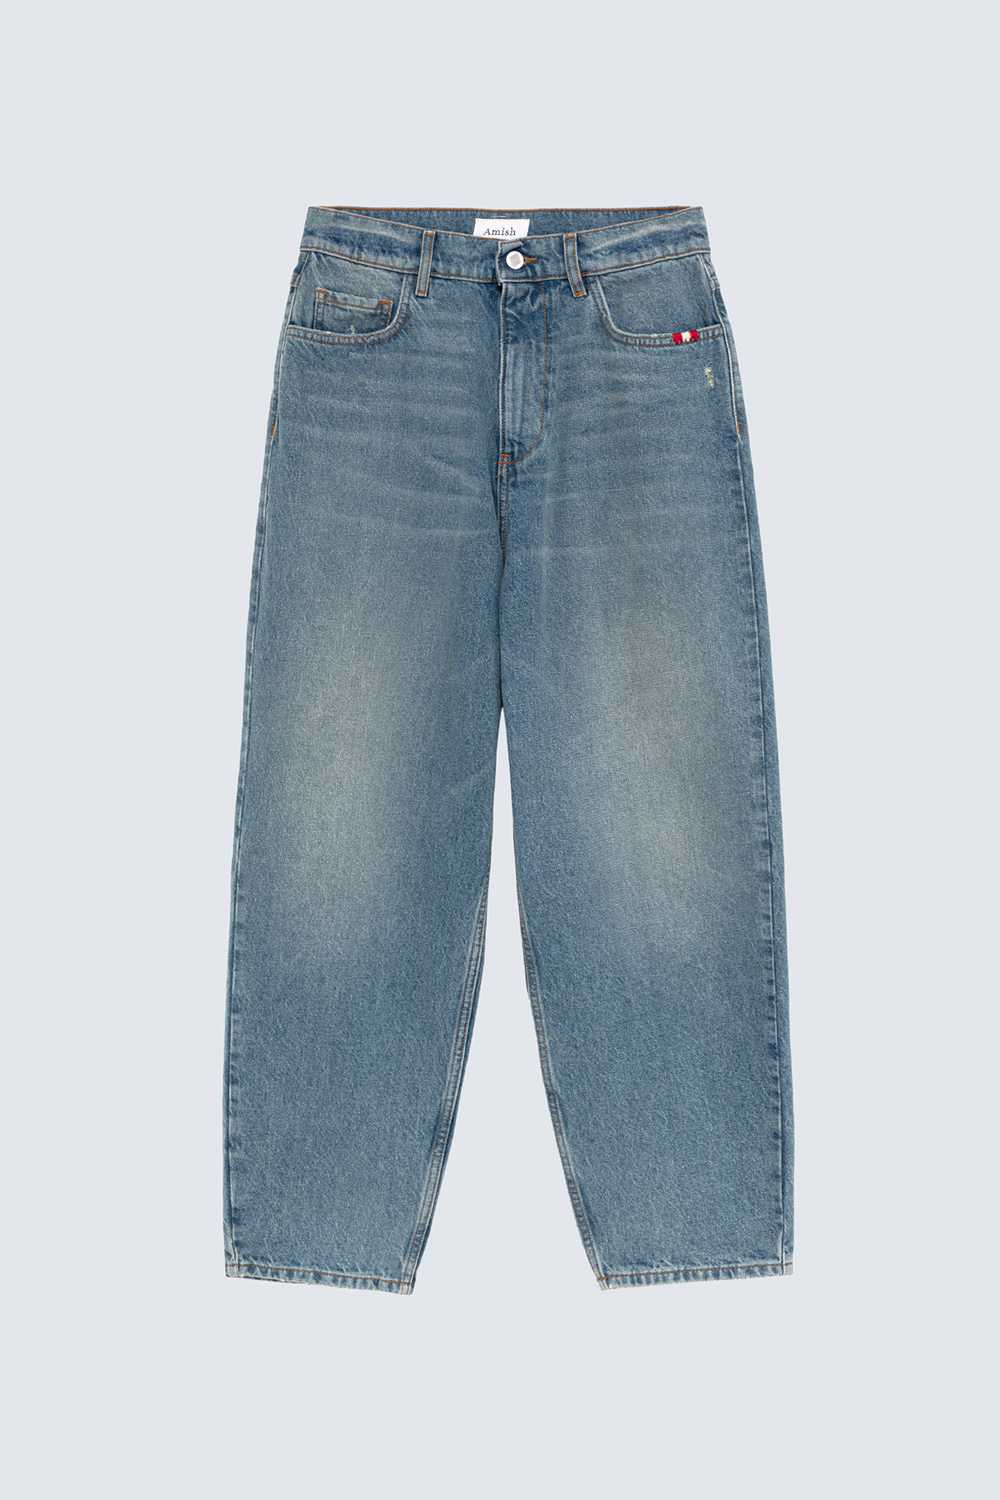 AMISH: JEANS BAGGY REAL VINTAGE